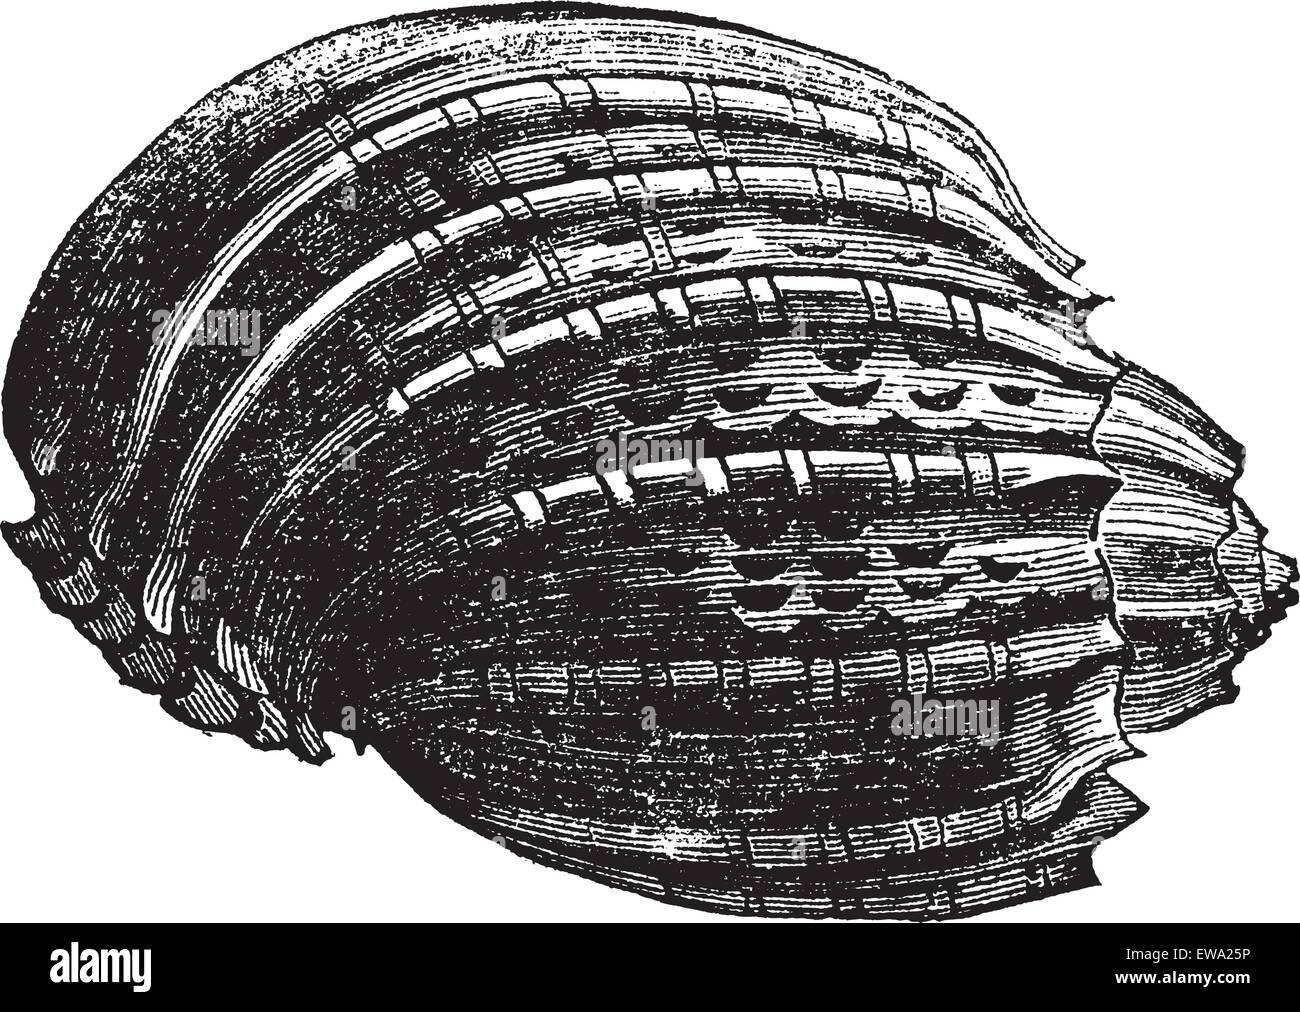 Harp (harp ventriculata) vintage engraving. Old engraved illustration of the harp shell. Stock Vector